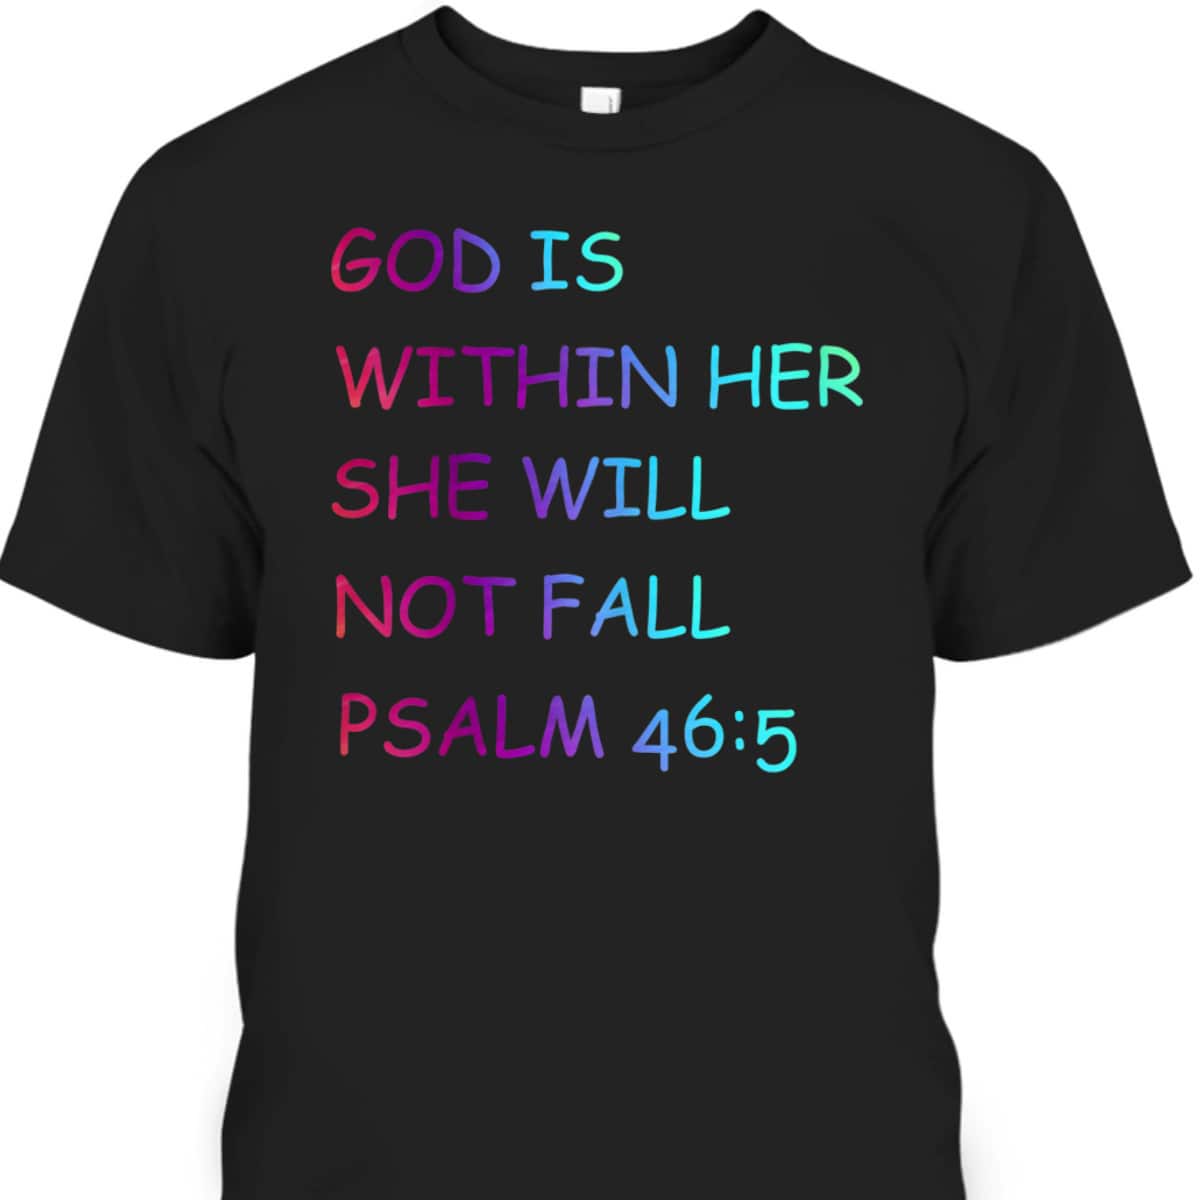 Colorful Christian Bible VerseGod Is Within Her She Will Not Fall Psalm 46:5 T-Shirt